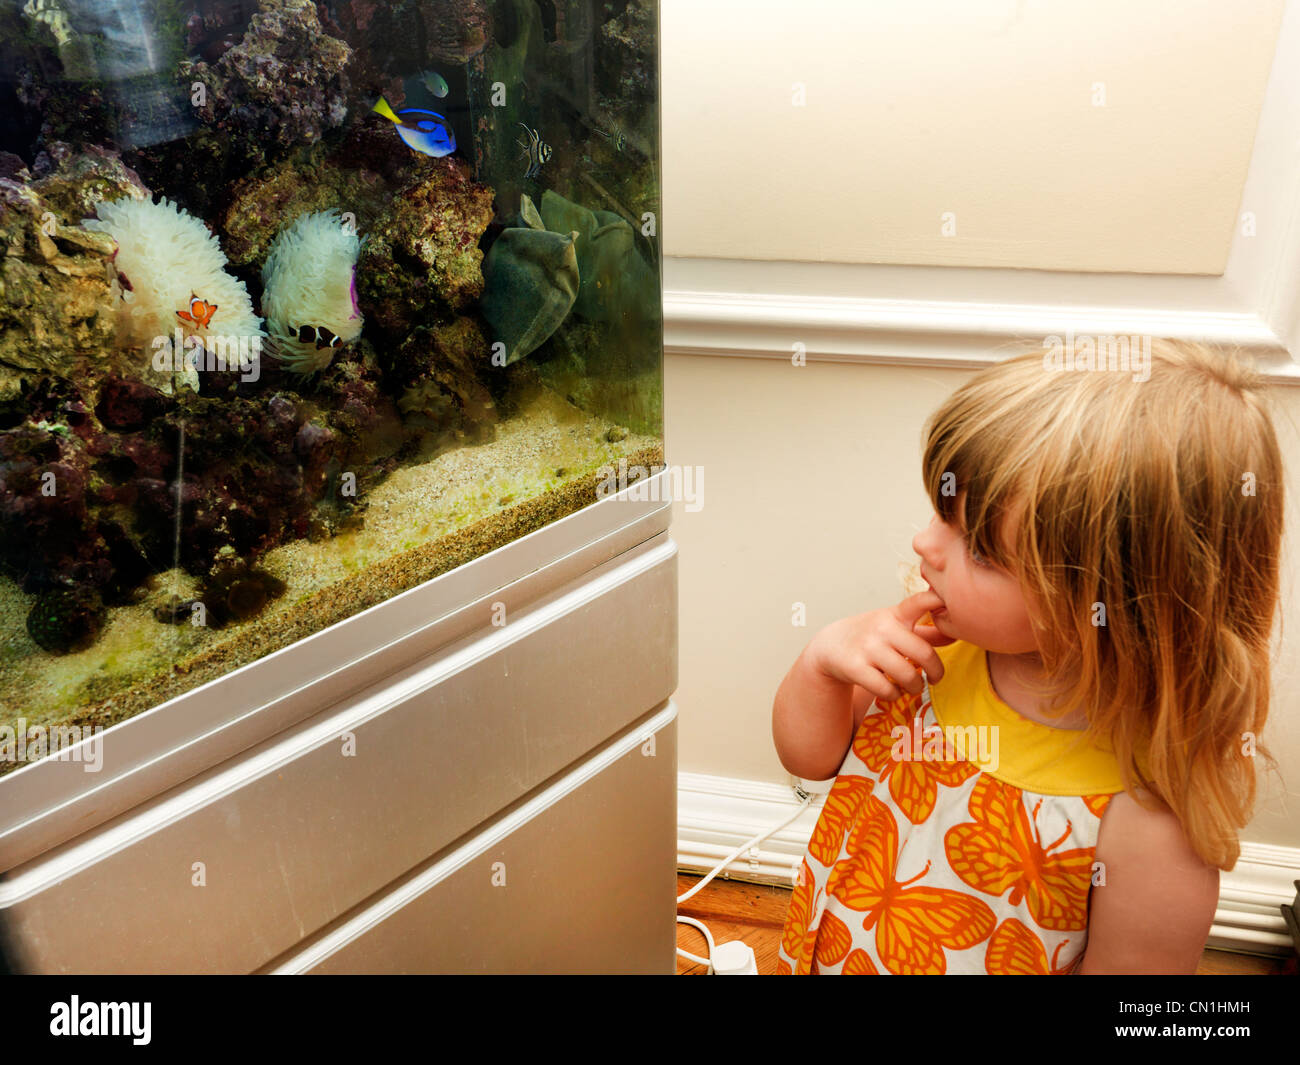 Young Girl Looking At Fish In Saltwater Fish Tank Stock Photo